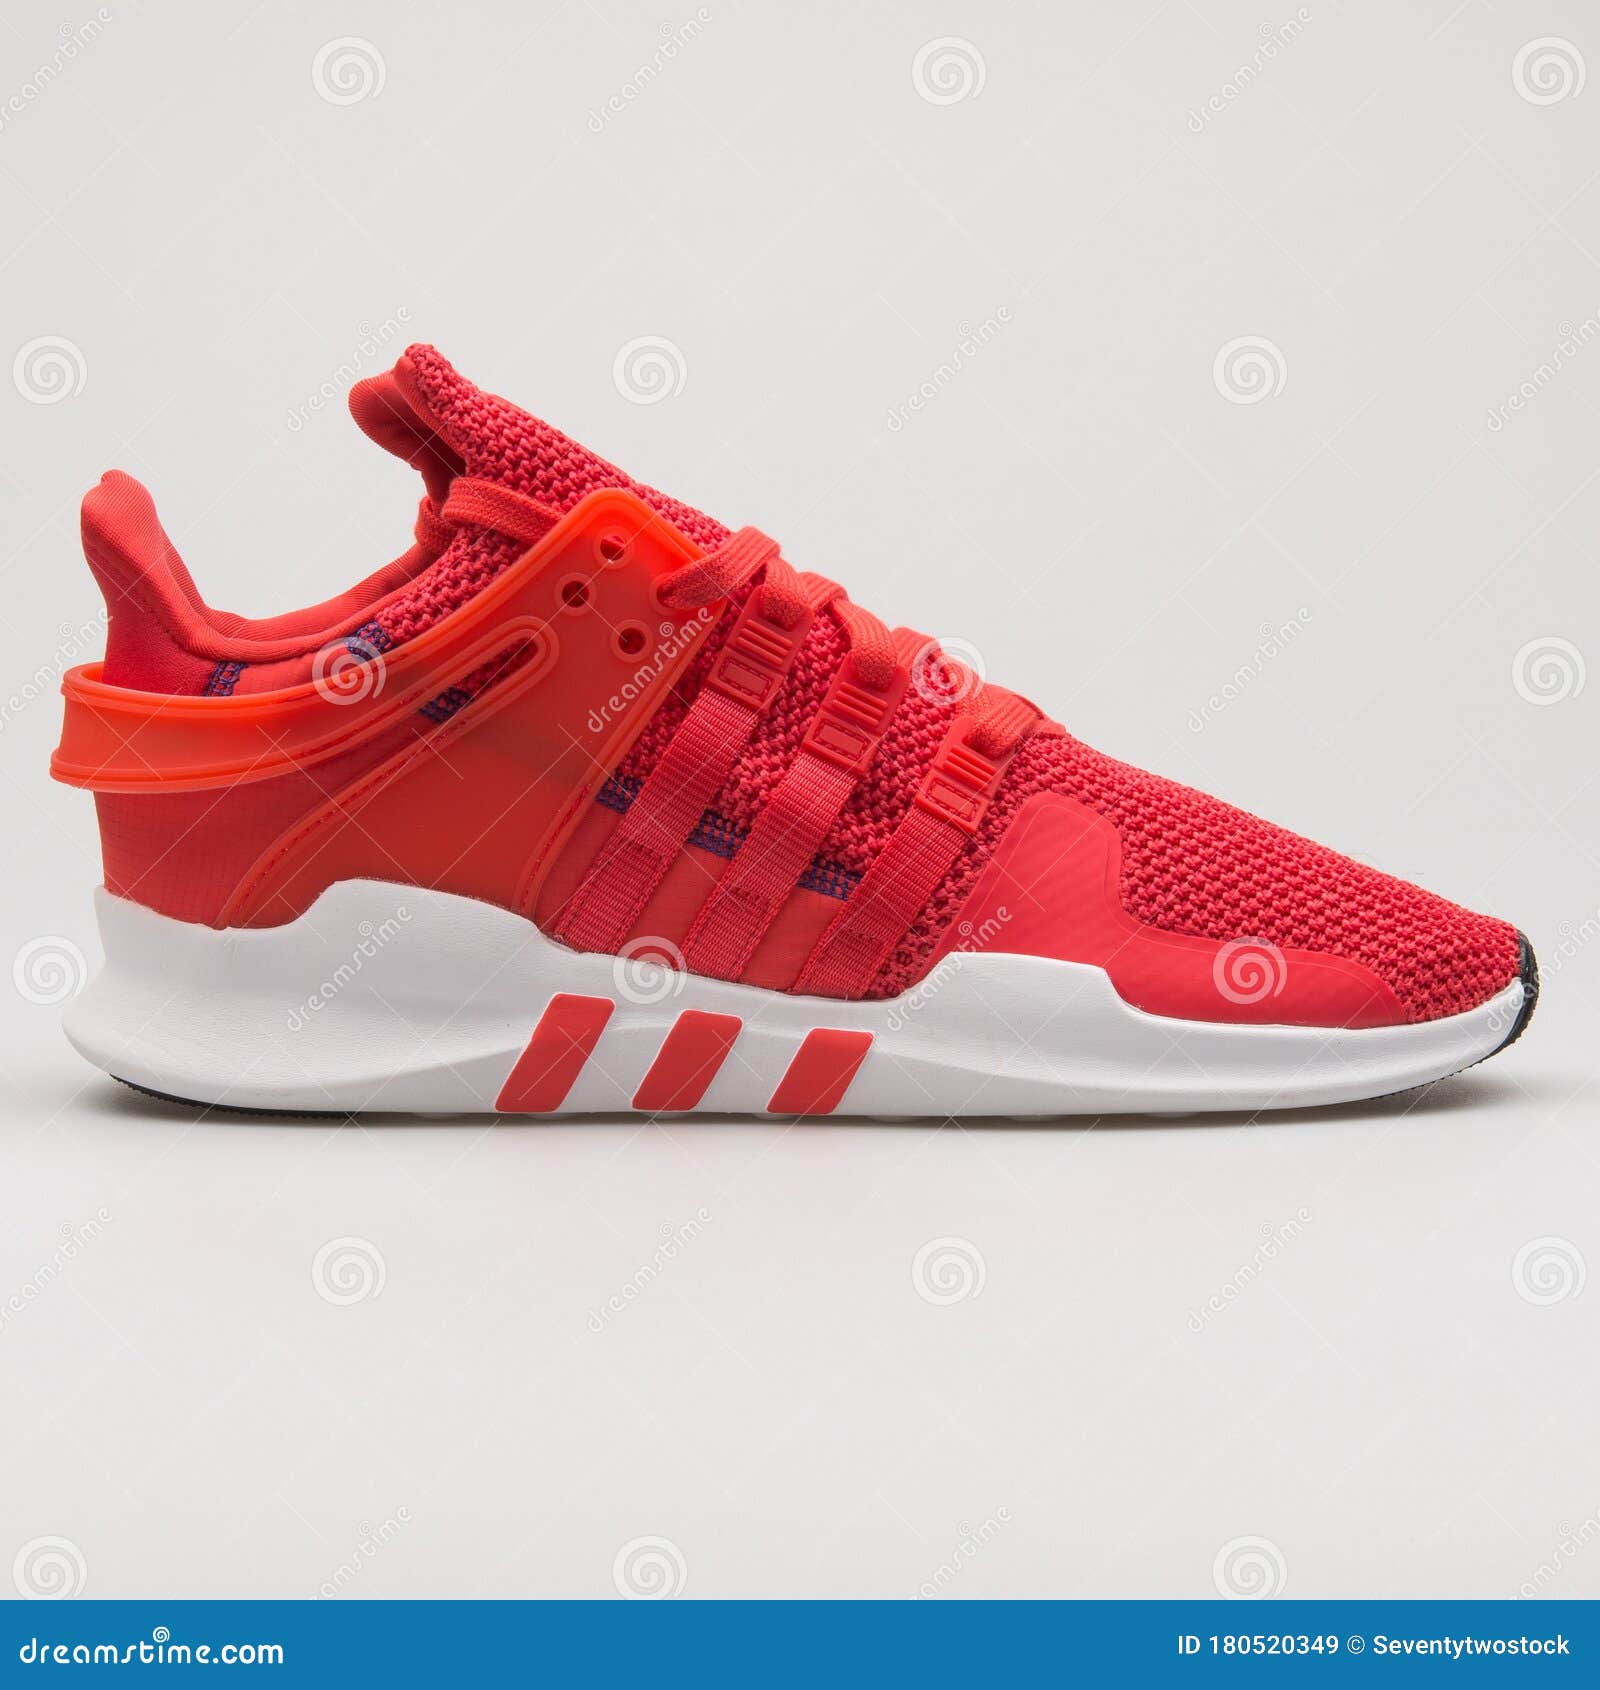 Adidas Eqt Support Adv Red And White Sneaker Editorial Stock Image - Image  Of Sole, Item: 180520349